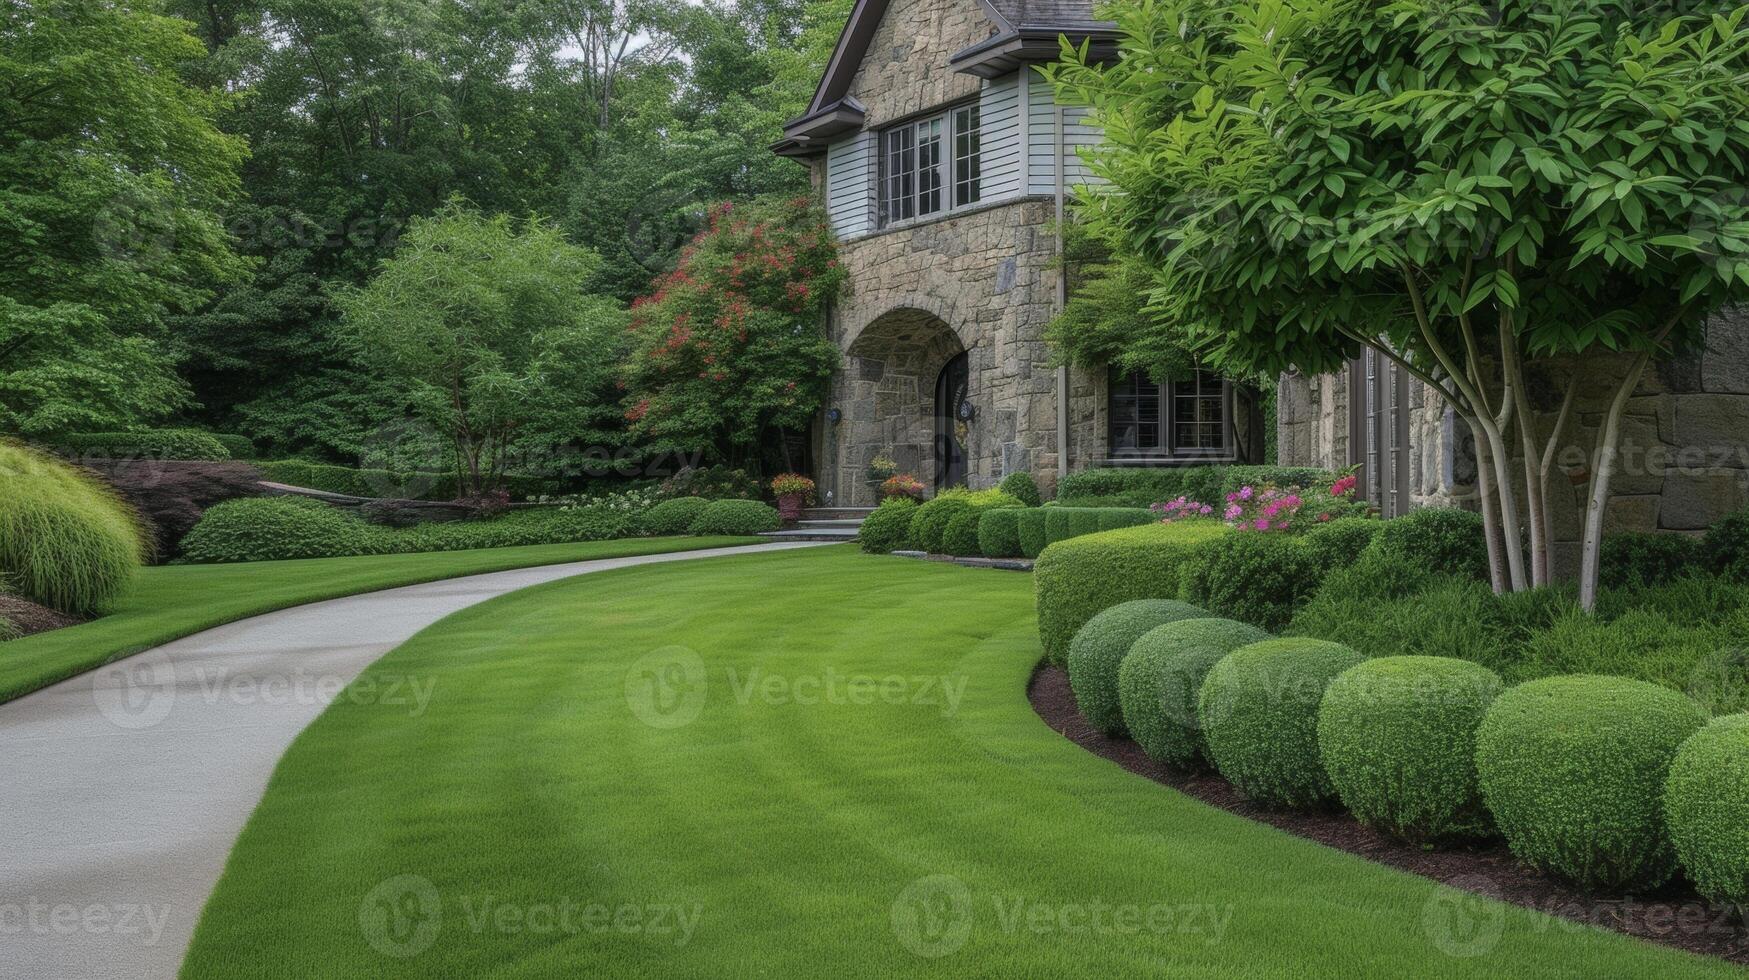 Lush green gr and neatly trimmed edges create a clean and inviting front lawn that is sure to catch the eye photo